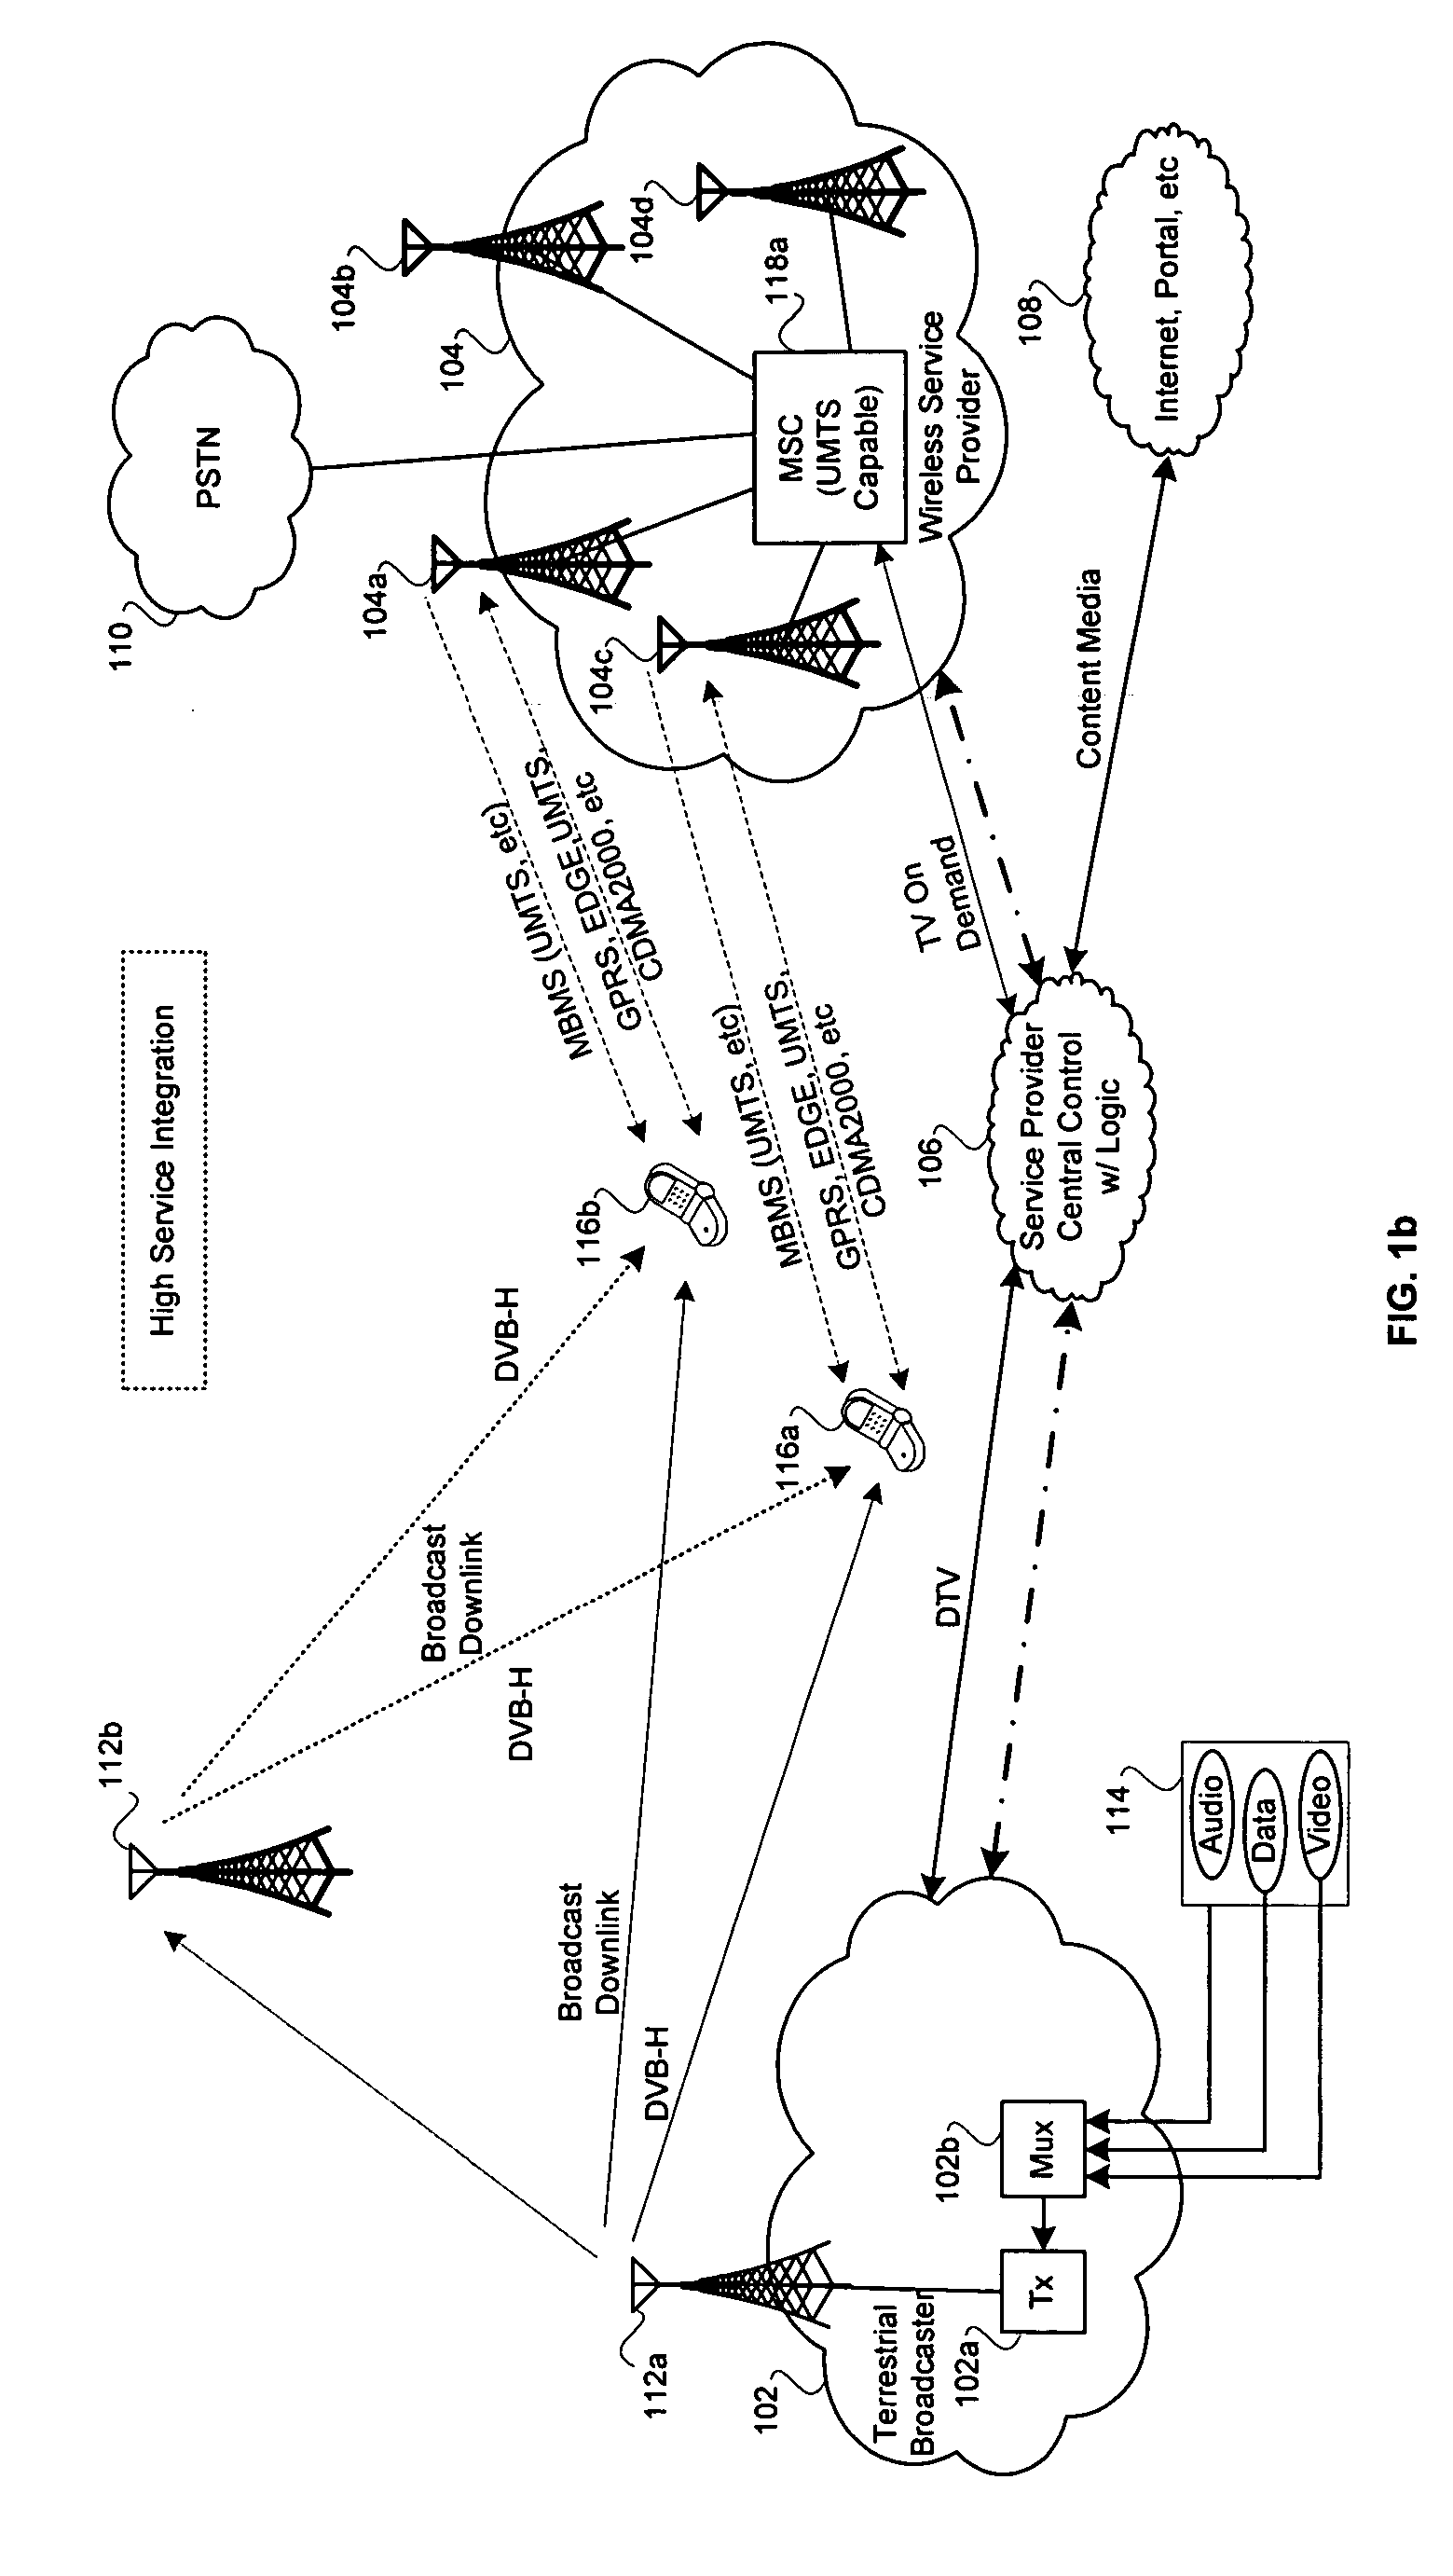 Method and system for mobile receiver antenna architecture for handling various digital video broadcast channels